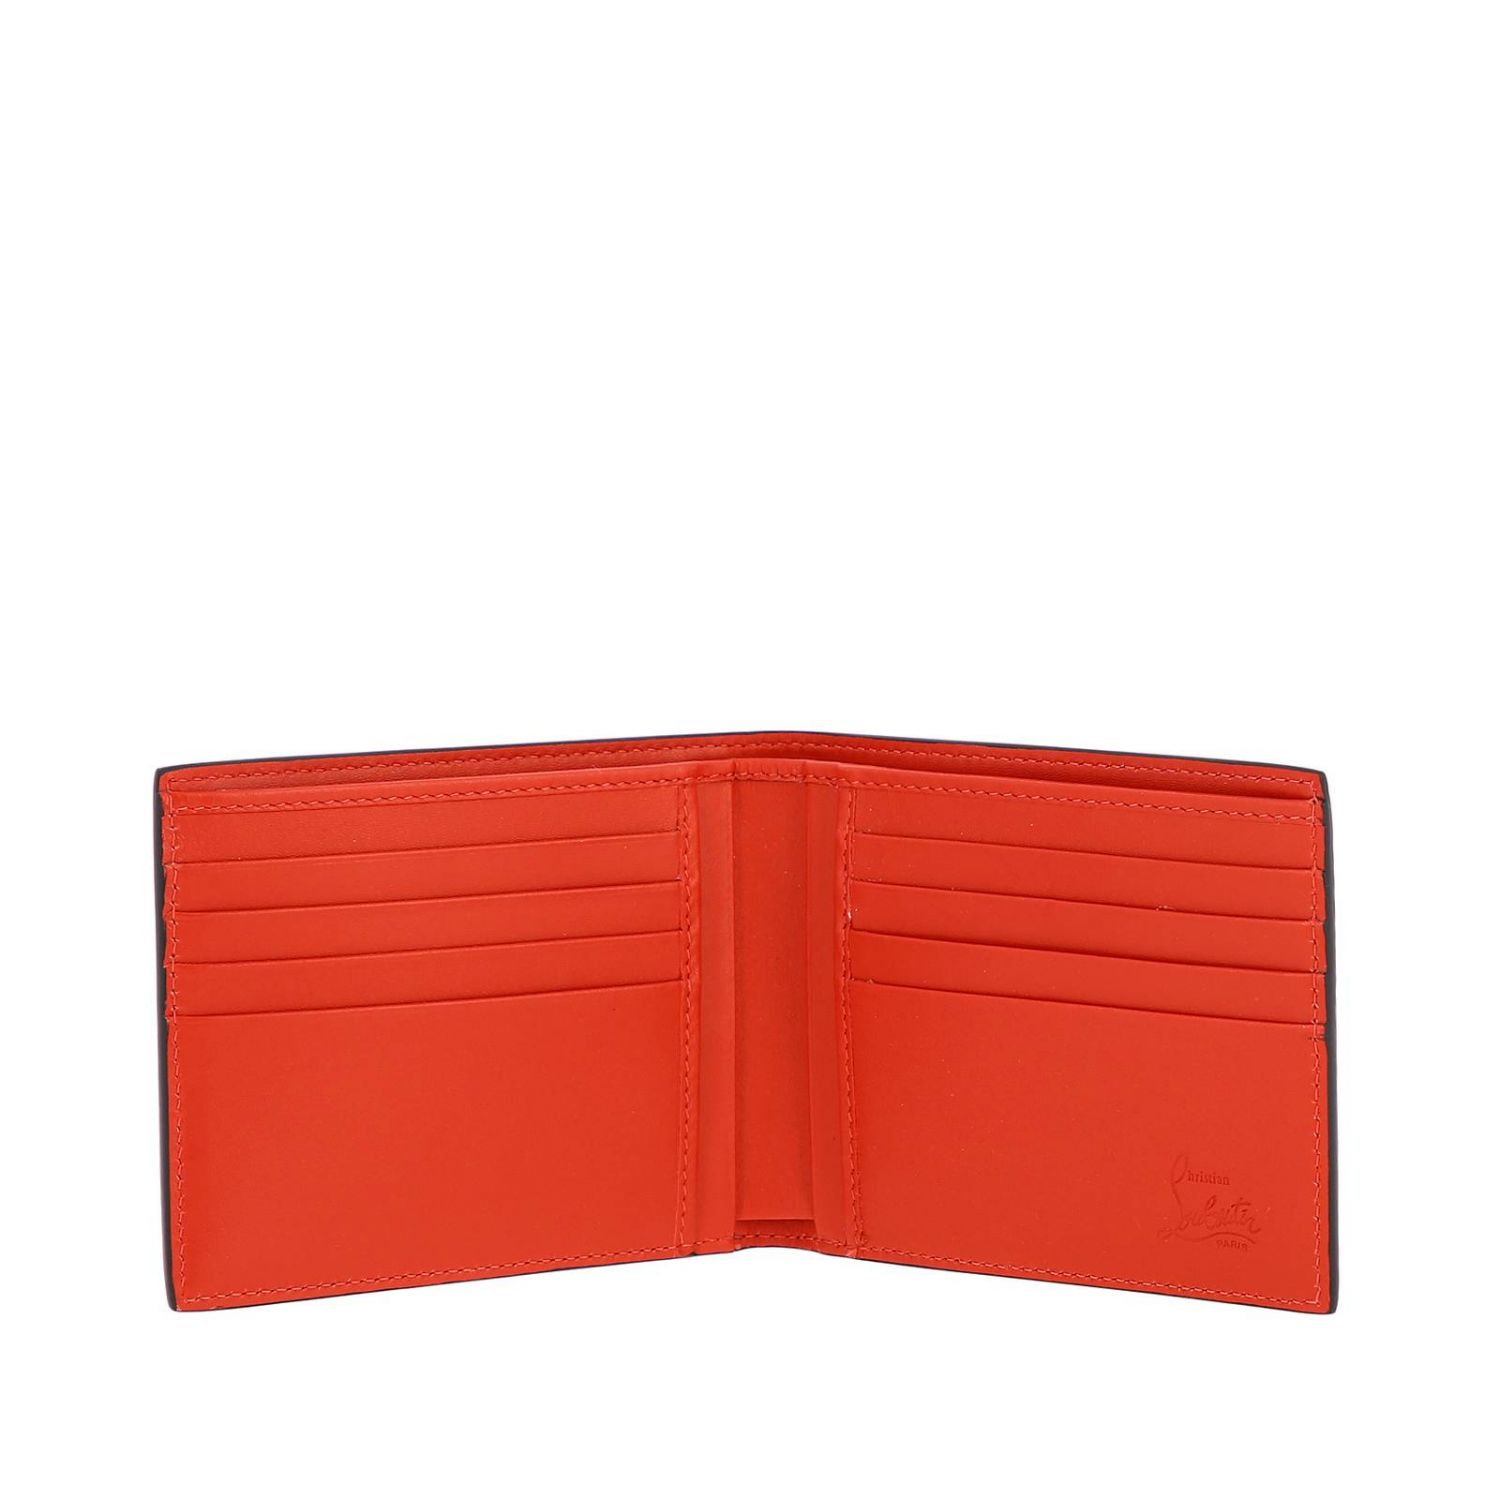 CHRISTIAN LOUBOUTIN: Coolcard wallet in textured leather and 